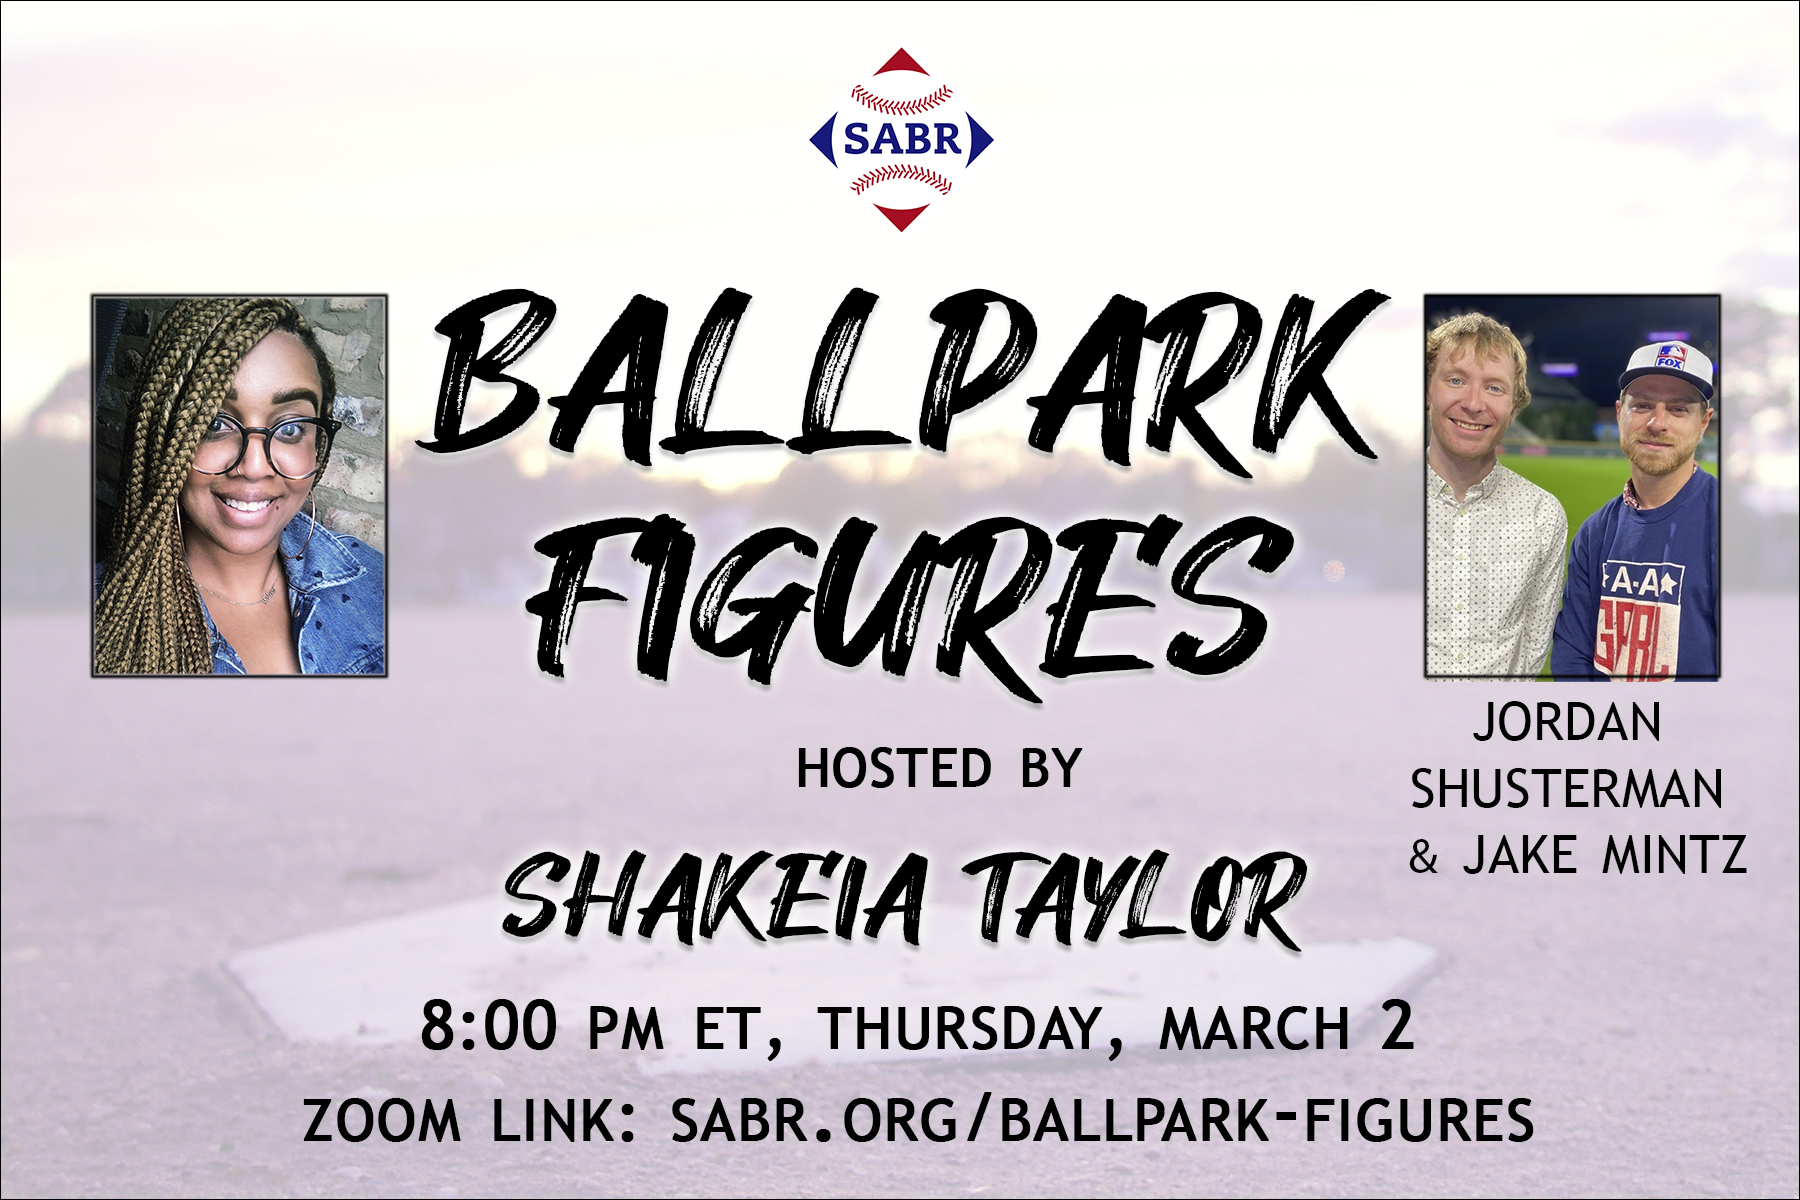 SABR's Ballpark Figures on March 2 will include special guests Jordan Shusterman and Jake Mintz